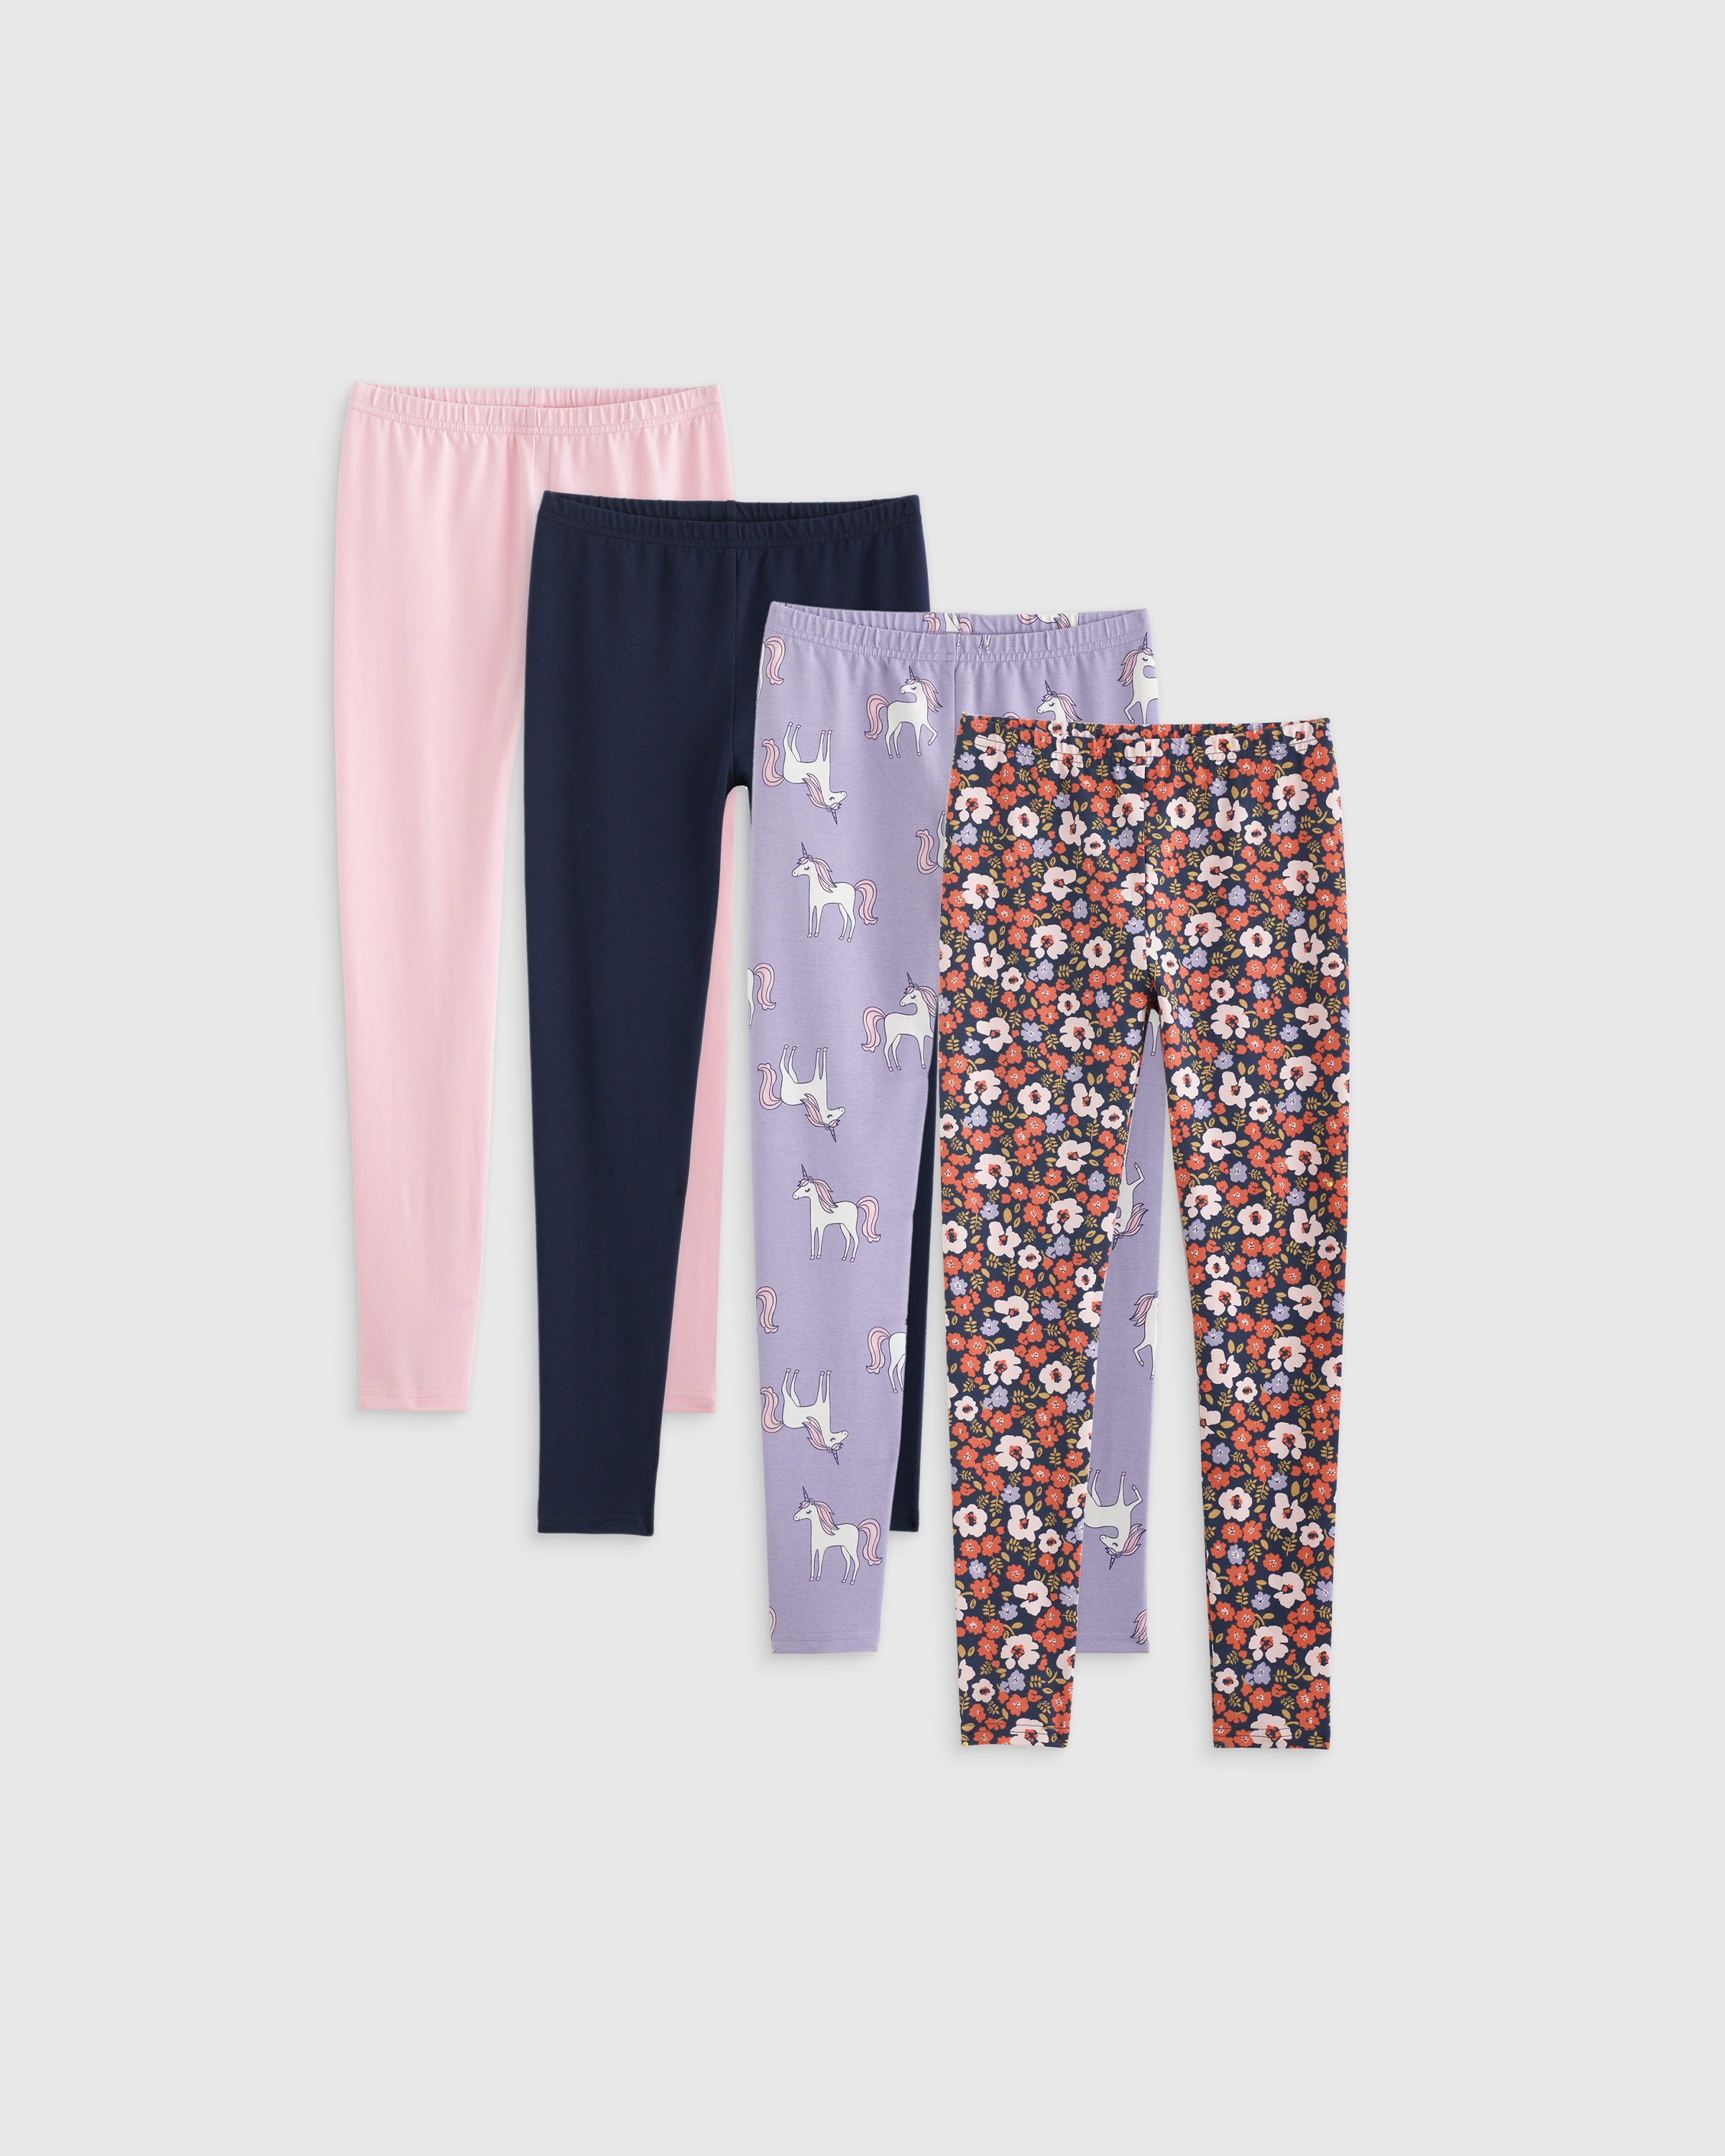 Shop Girl CUPIDPINK Toddler Organic Cotton Mix and Match Leggings - 3.5 KWD  in Kuwait